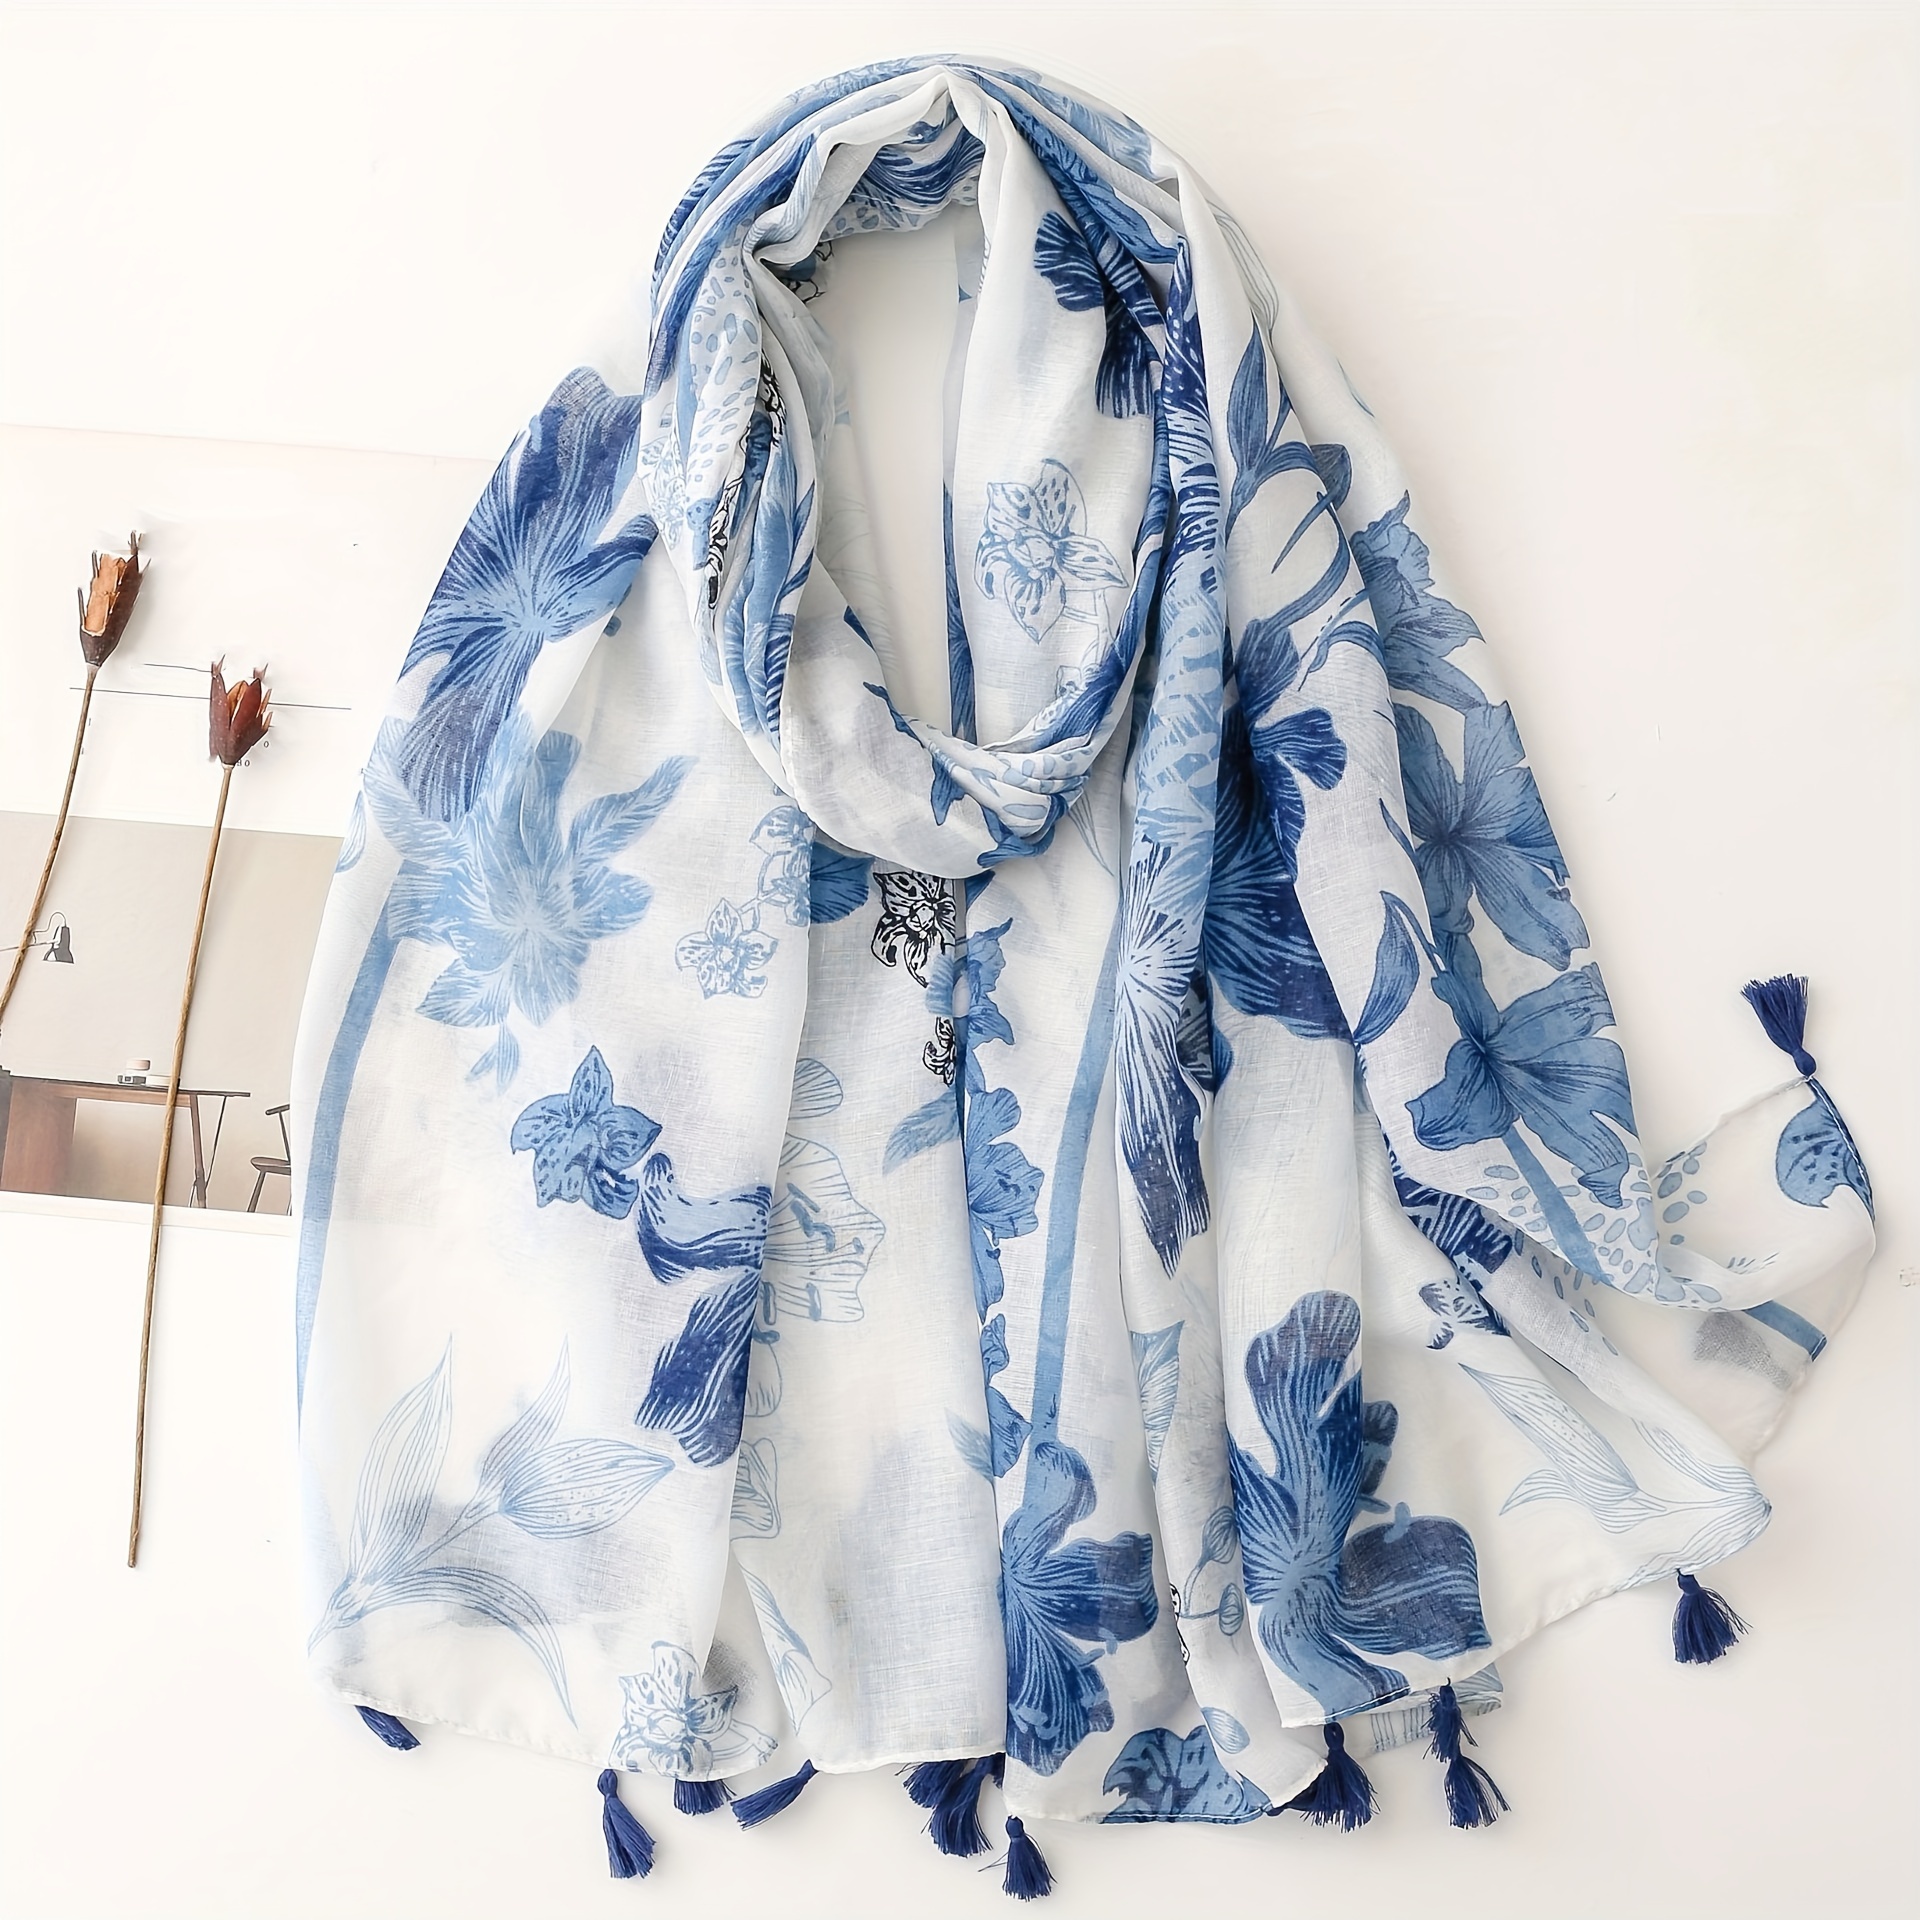 

Bohemian Style Cotton-linen Scarf, Vintage Blue & White Porcelain Printed Shawl, Bali Yarn Silk Shawl With Tassel, Floral Watercolor Women's Wrap With Tassels